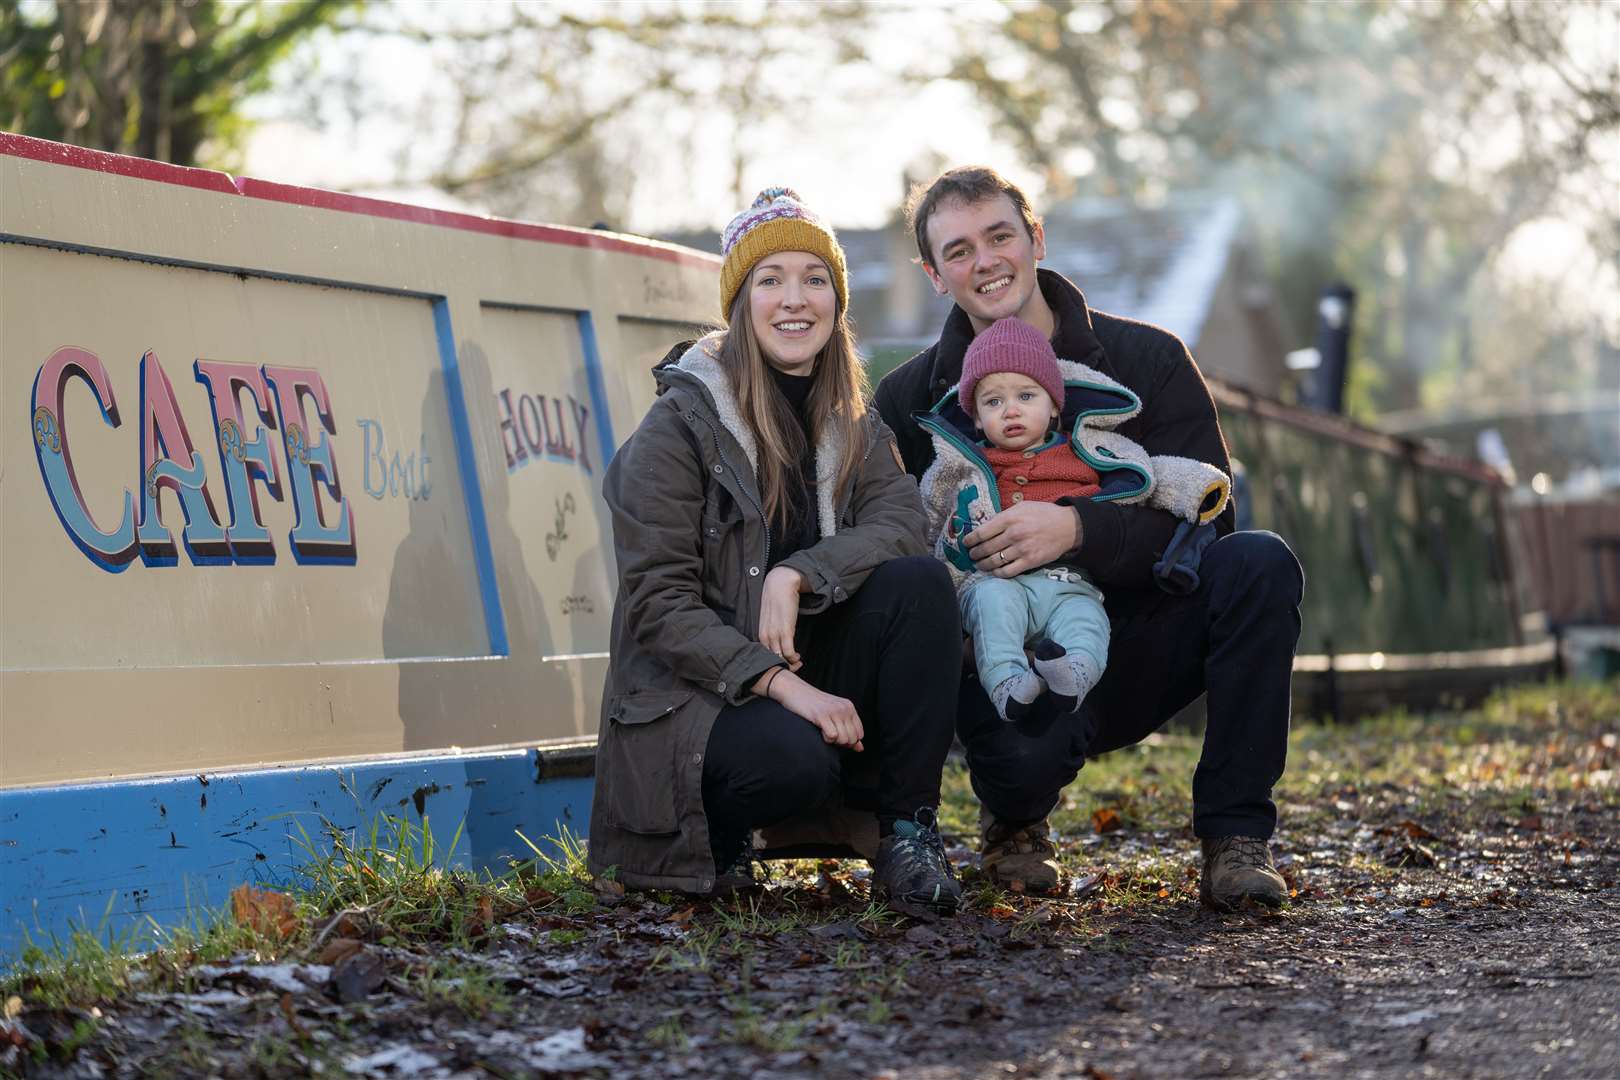 Joanna and Victor Gould, both 34, and son William Gould, 15 months, who moved from London to start a canal boat cafe. Picture: SWNS